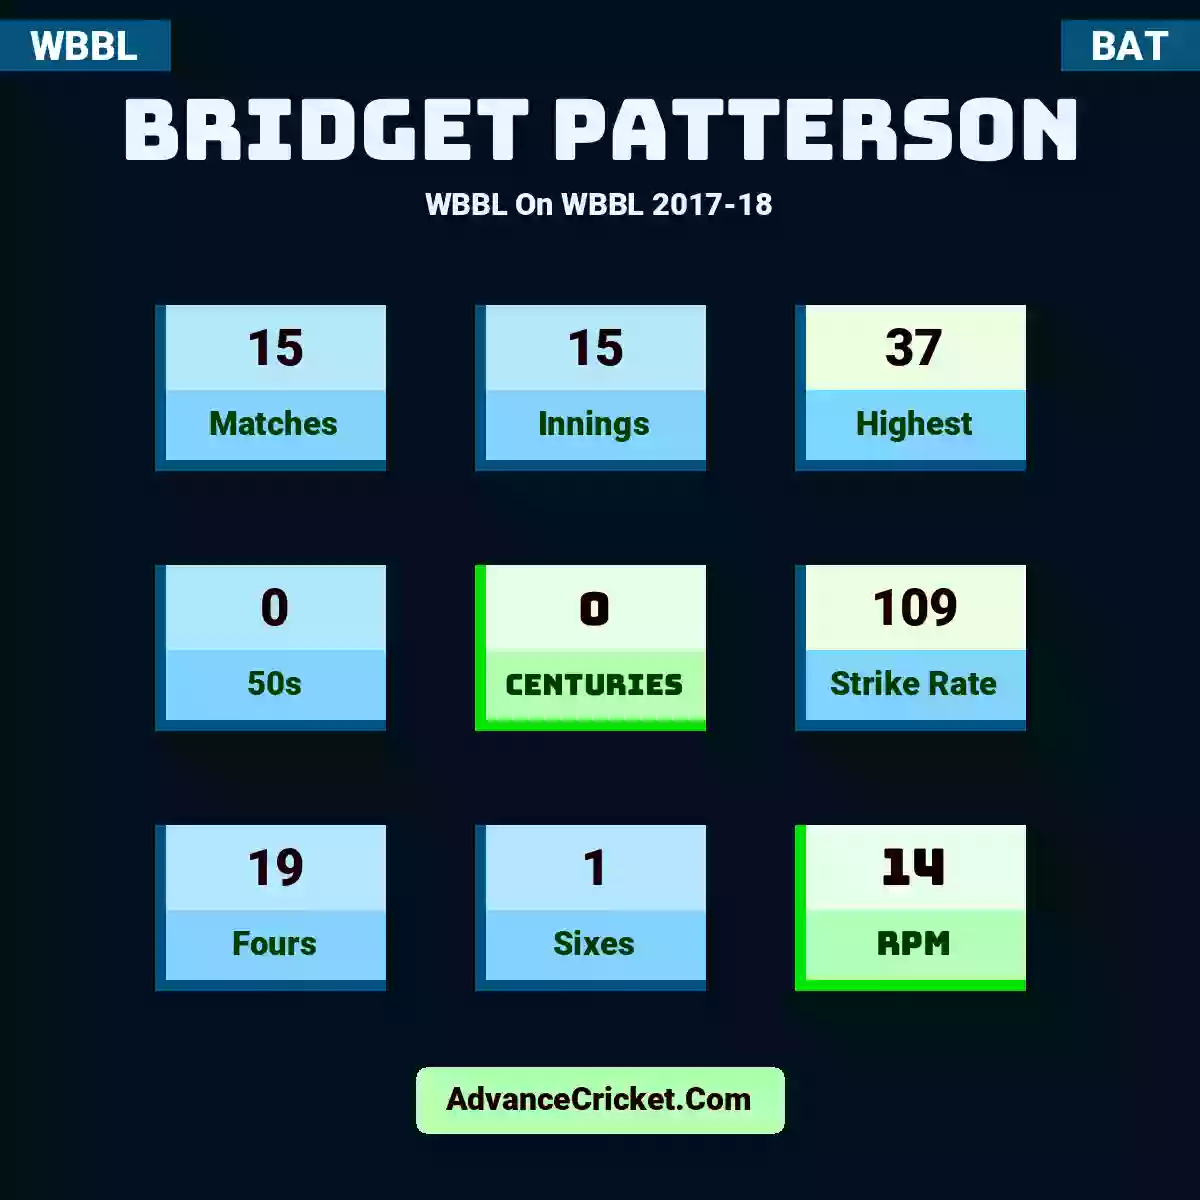 Bridget Patterson WBBL  On WBBL 2017-18, Bridget Patterson played 15 matches, scored 37 runs as highest, 0 half-centuries, and 0 centuries, with a strike rate of 109. B.Patterson hit 19 fours and 1 sixes, with an RPM of 14.